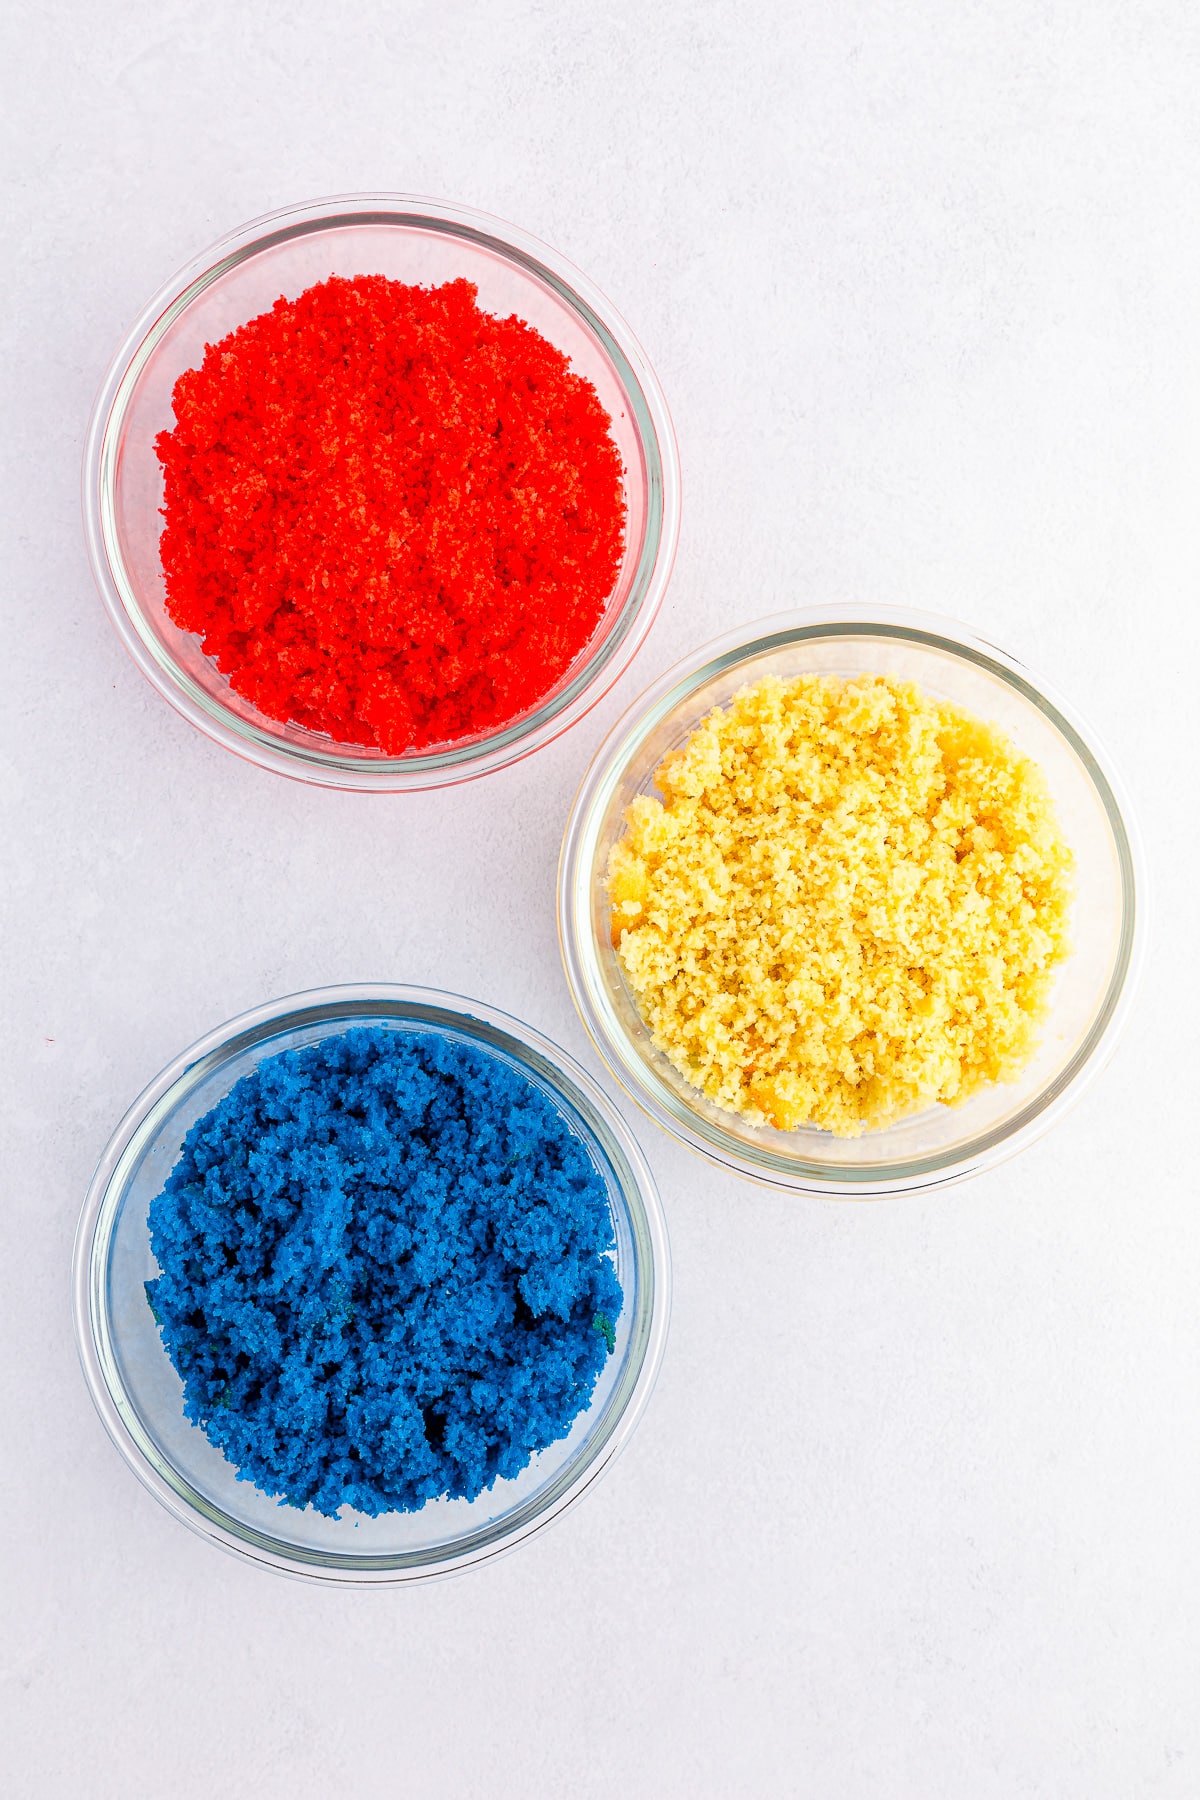 Colored cake crumbled in individual bowls of red, white and blue crumbs from overhead.